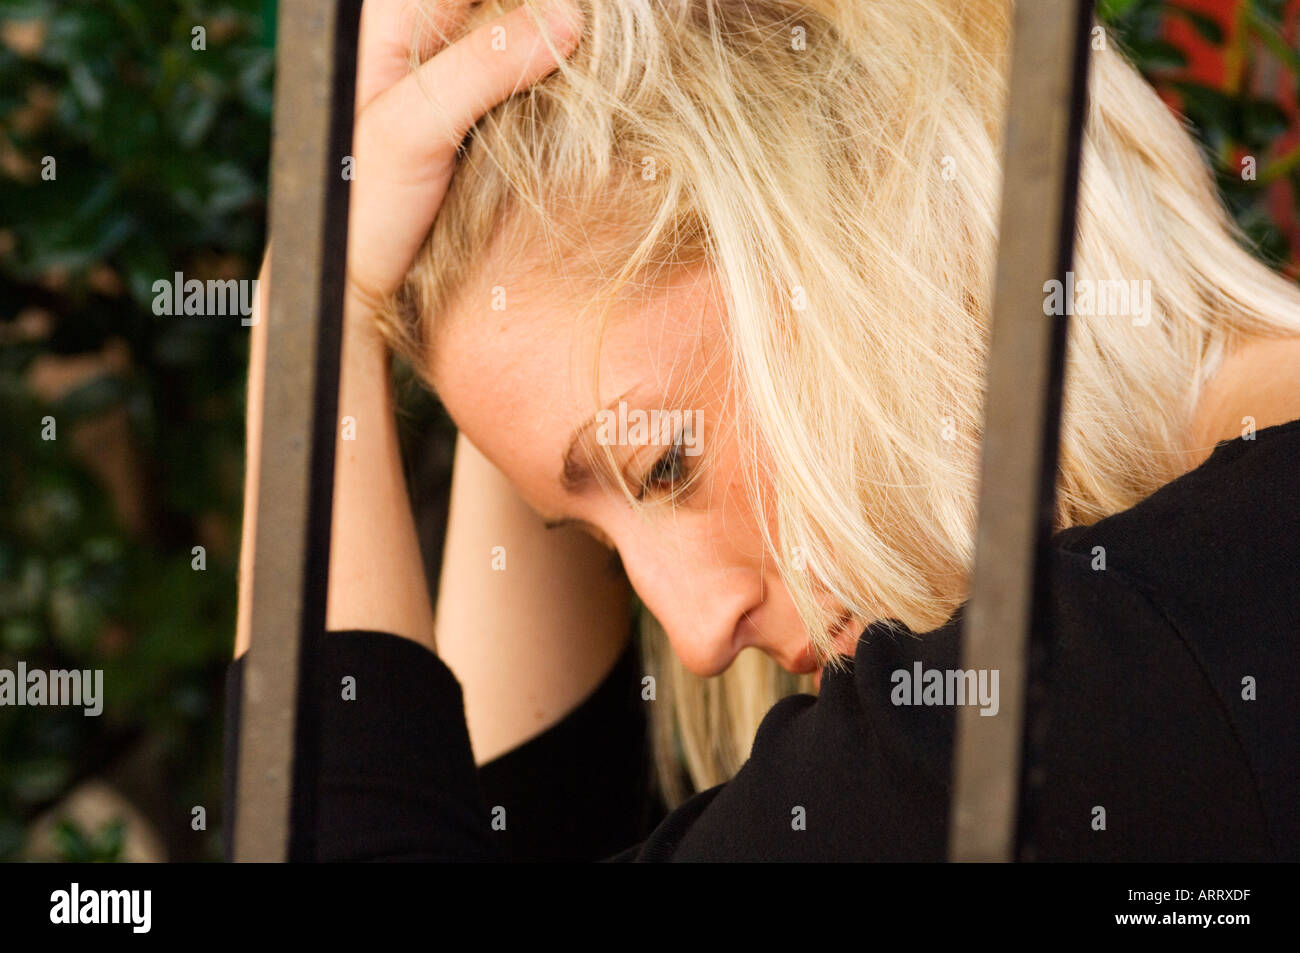 Blonde woman sitting dejected behind bars Stock Photo